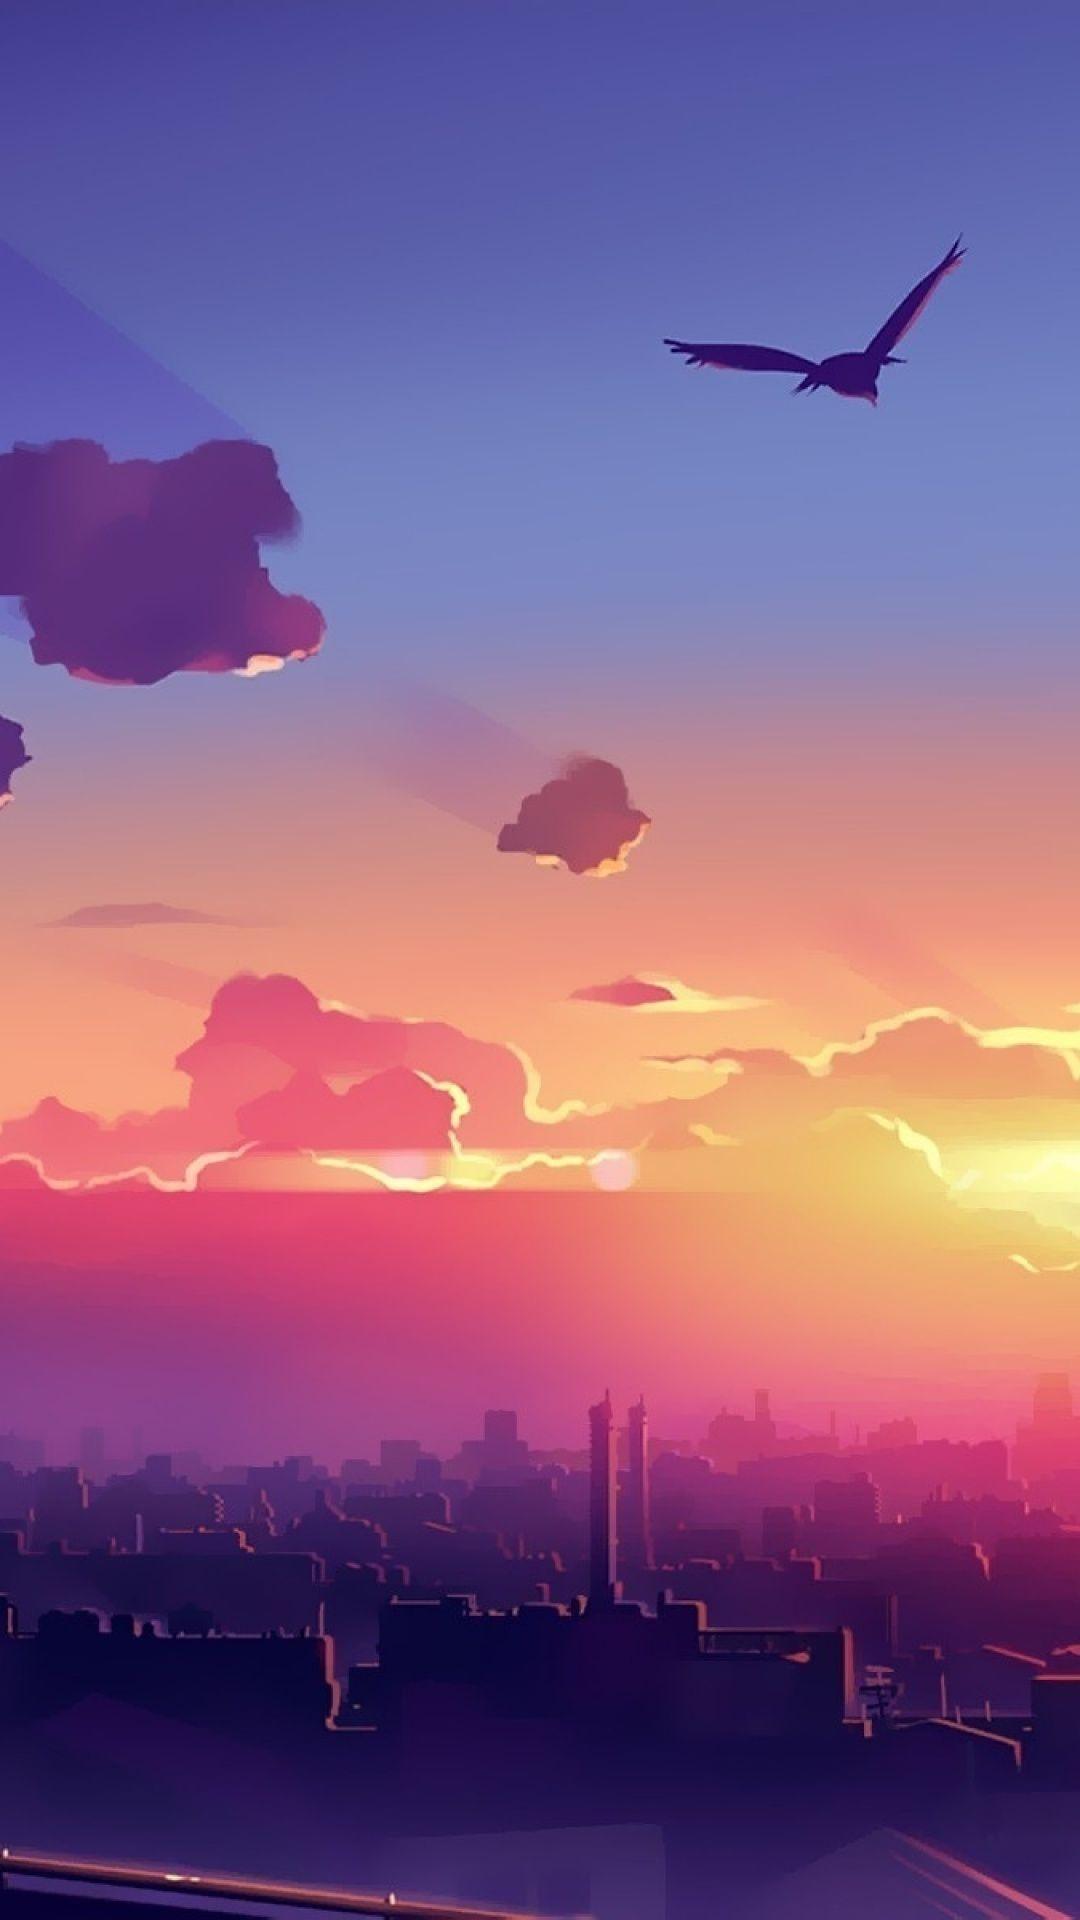 Anime Sunset Iphone Wallpapers - Top Free Anime Sunset Iphone